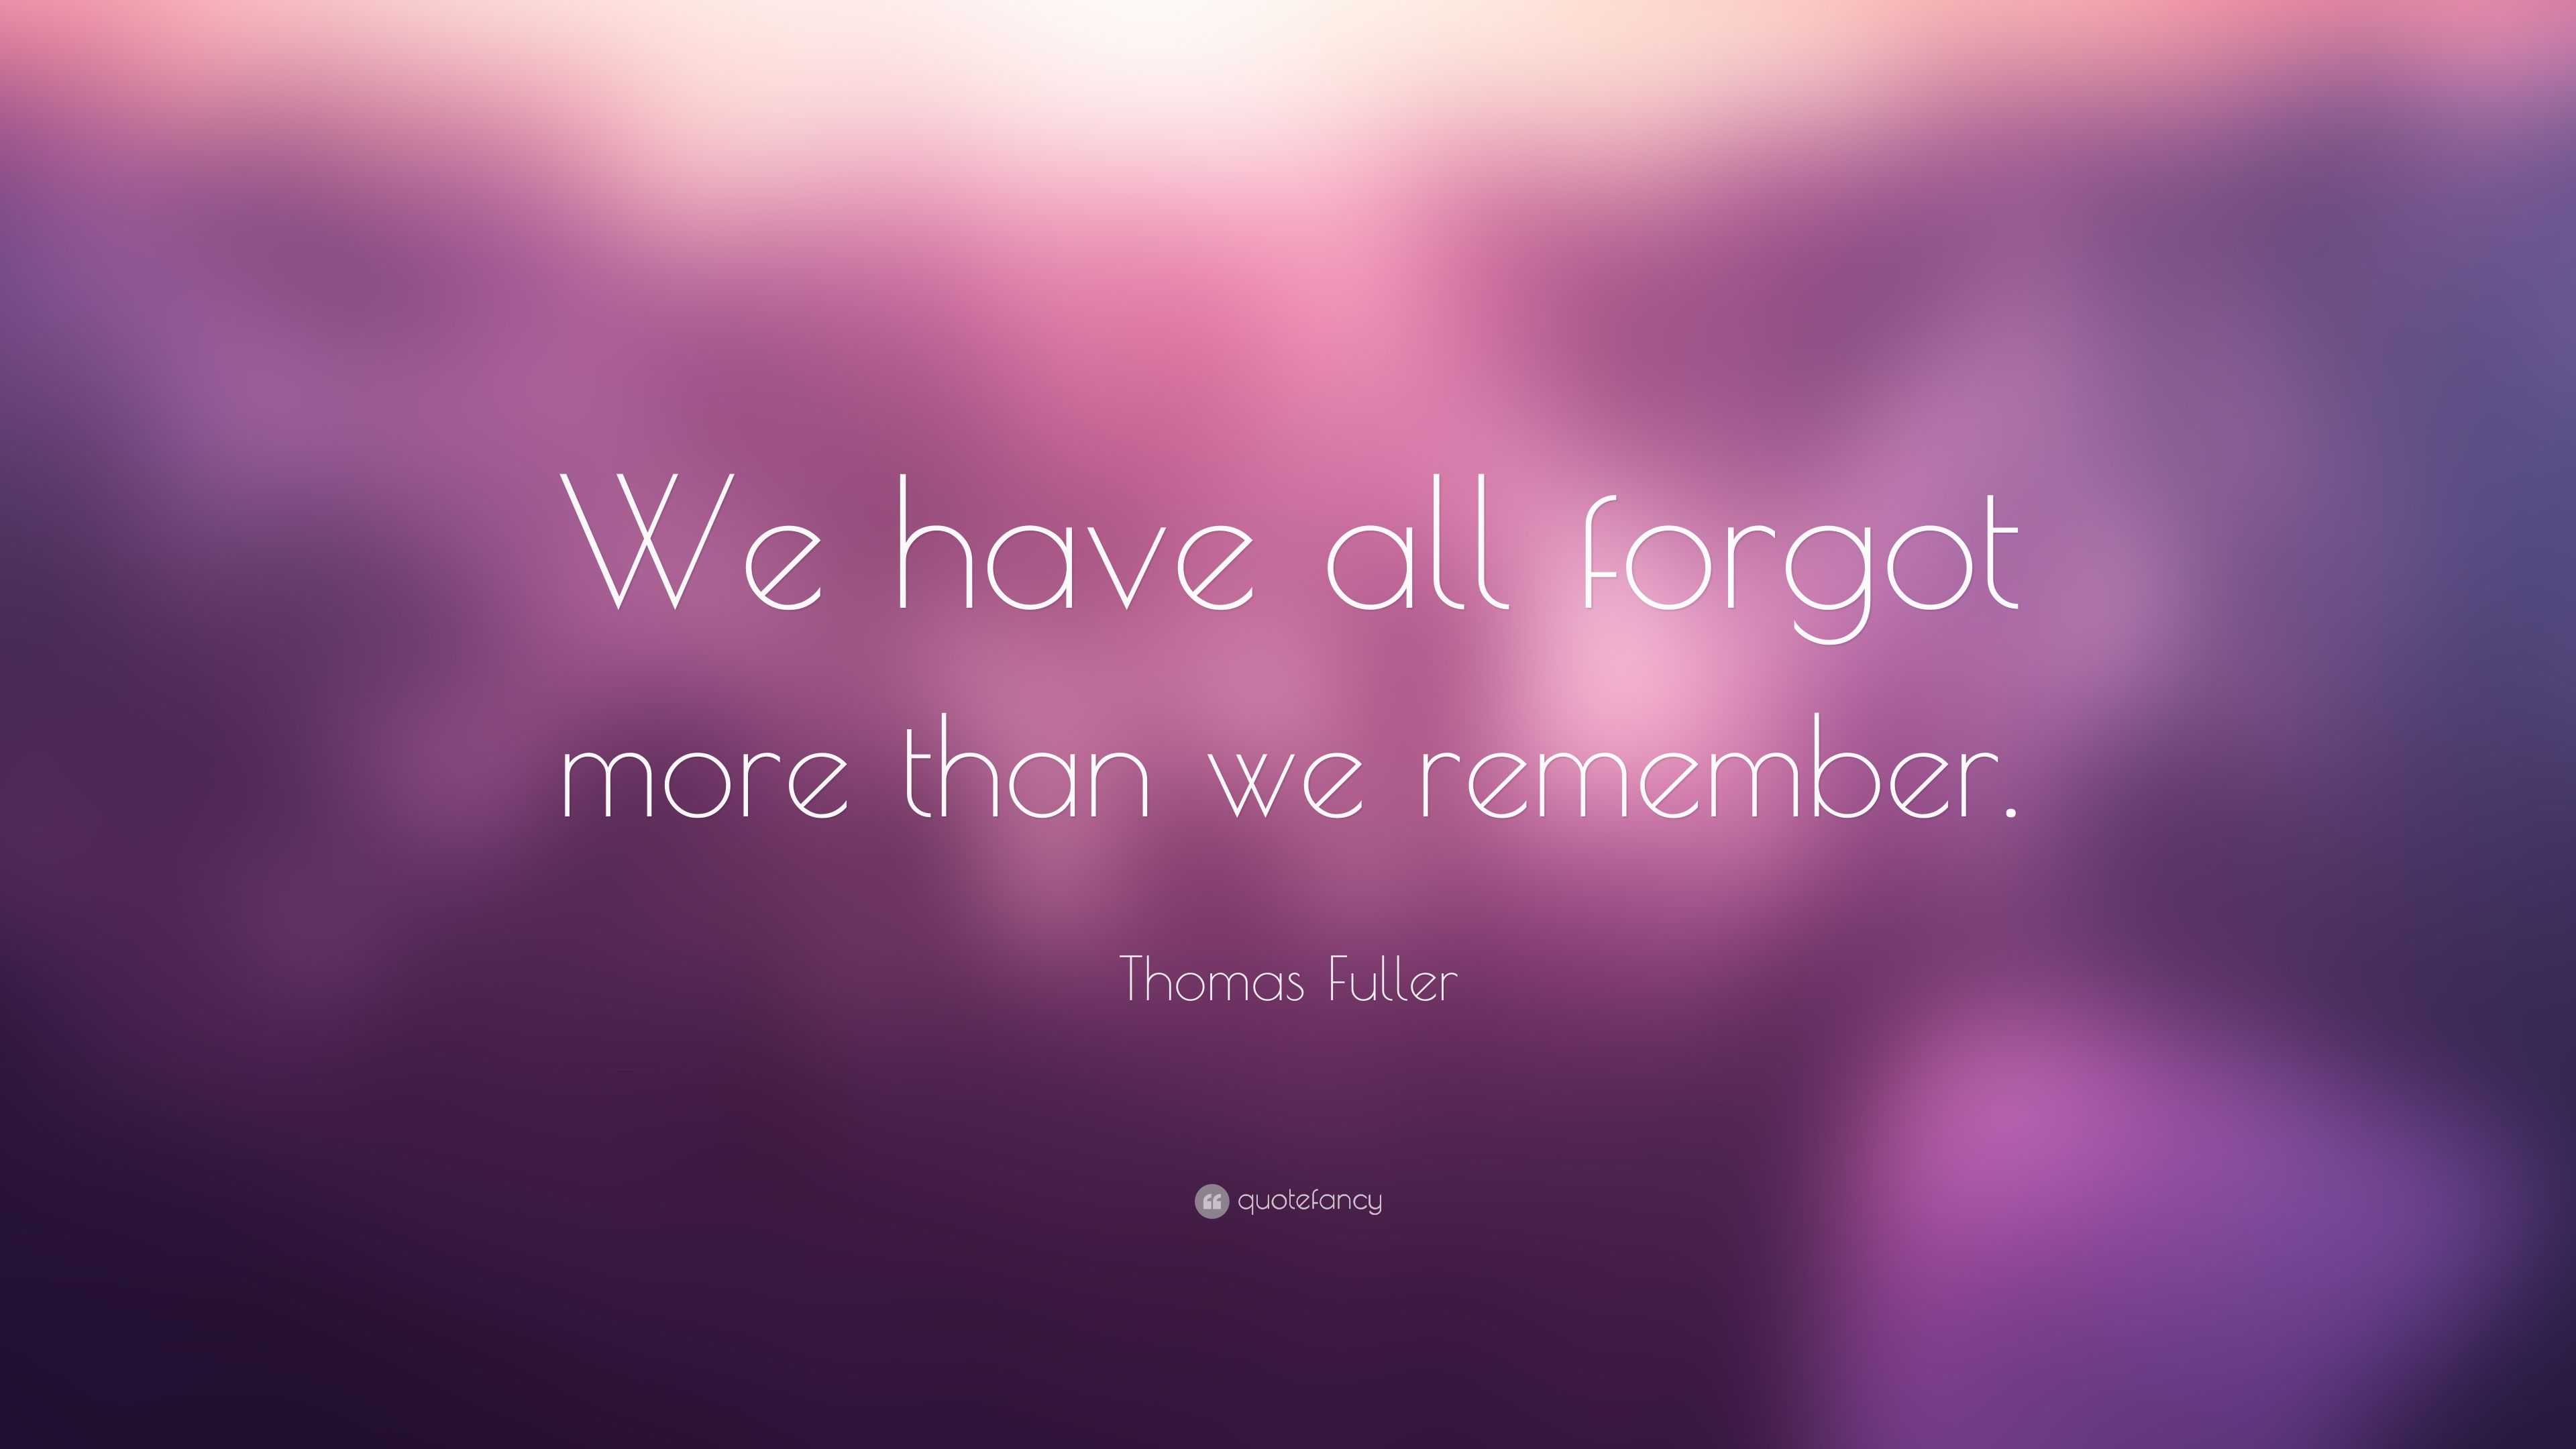 Thomas Fuller Quote: “We have all forgot more than we remember.”